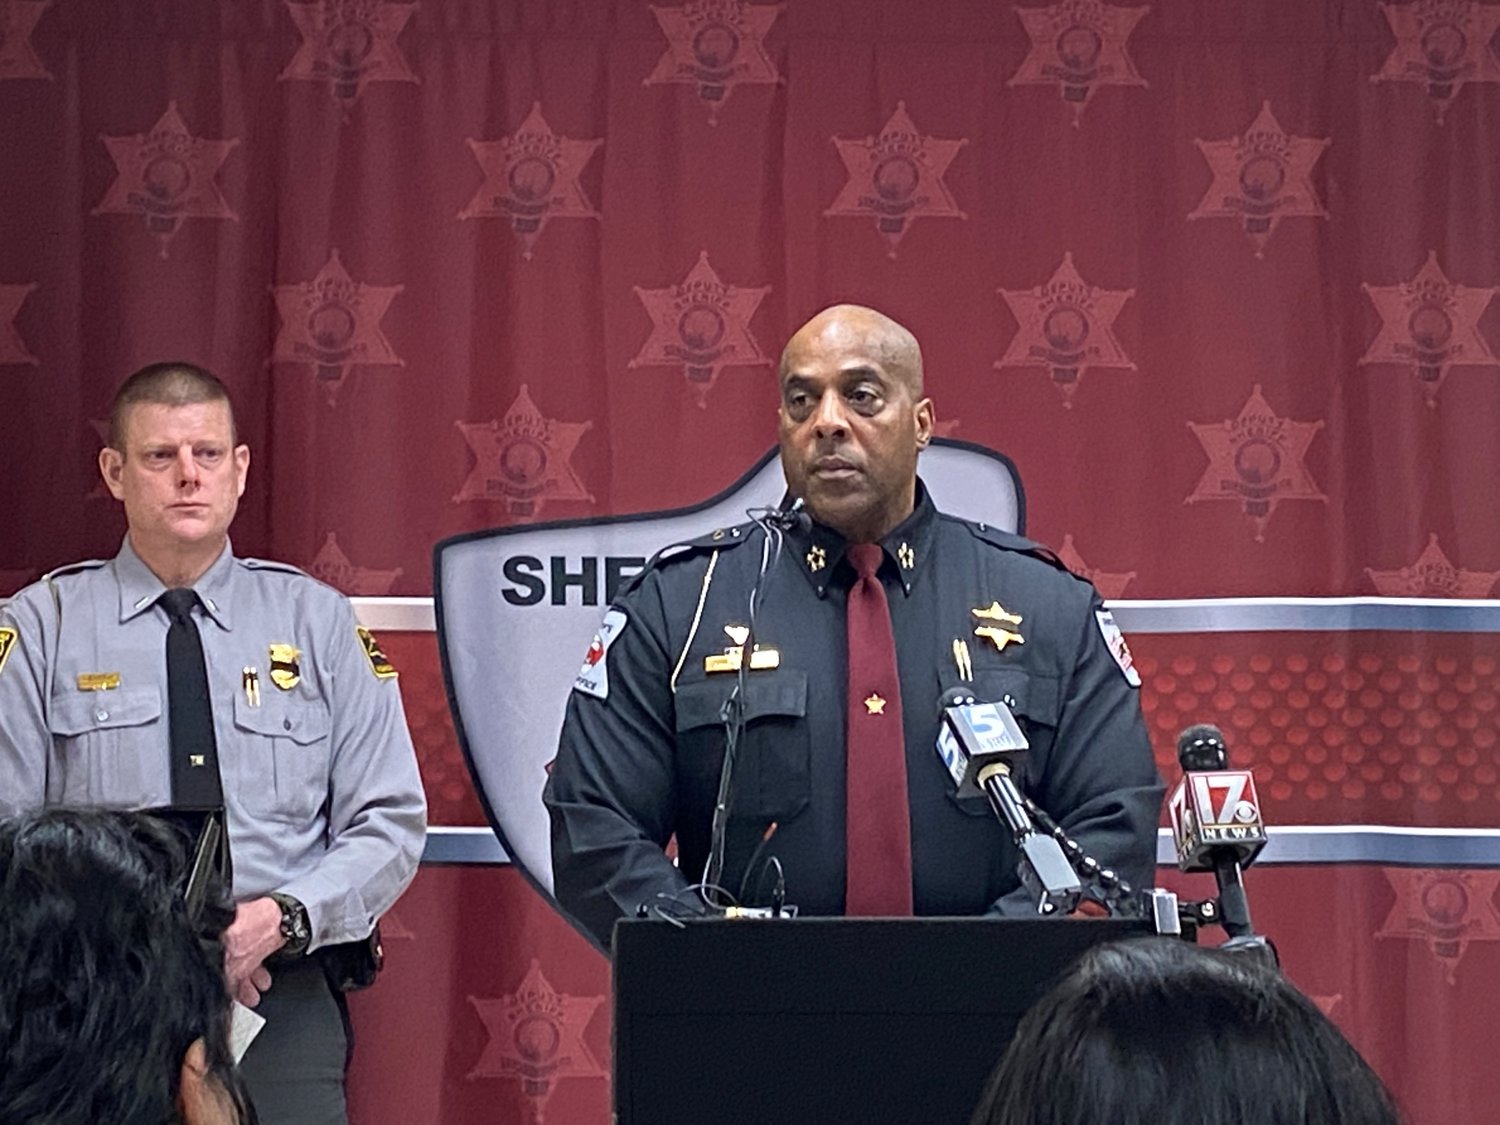 Cumberland County Sheriff Ennis Wright speaks during a news conference Friday about the death of Deputy Oscar Yovani Bolanos-Anavisca Jr., who died early Friday after being struck by a vehicle on Gillespie Street while investigating a robbery report.